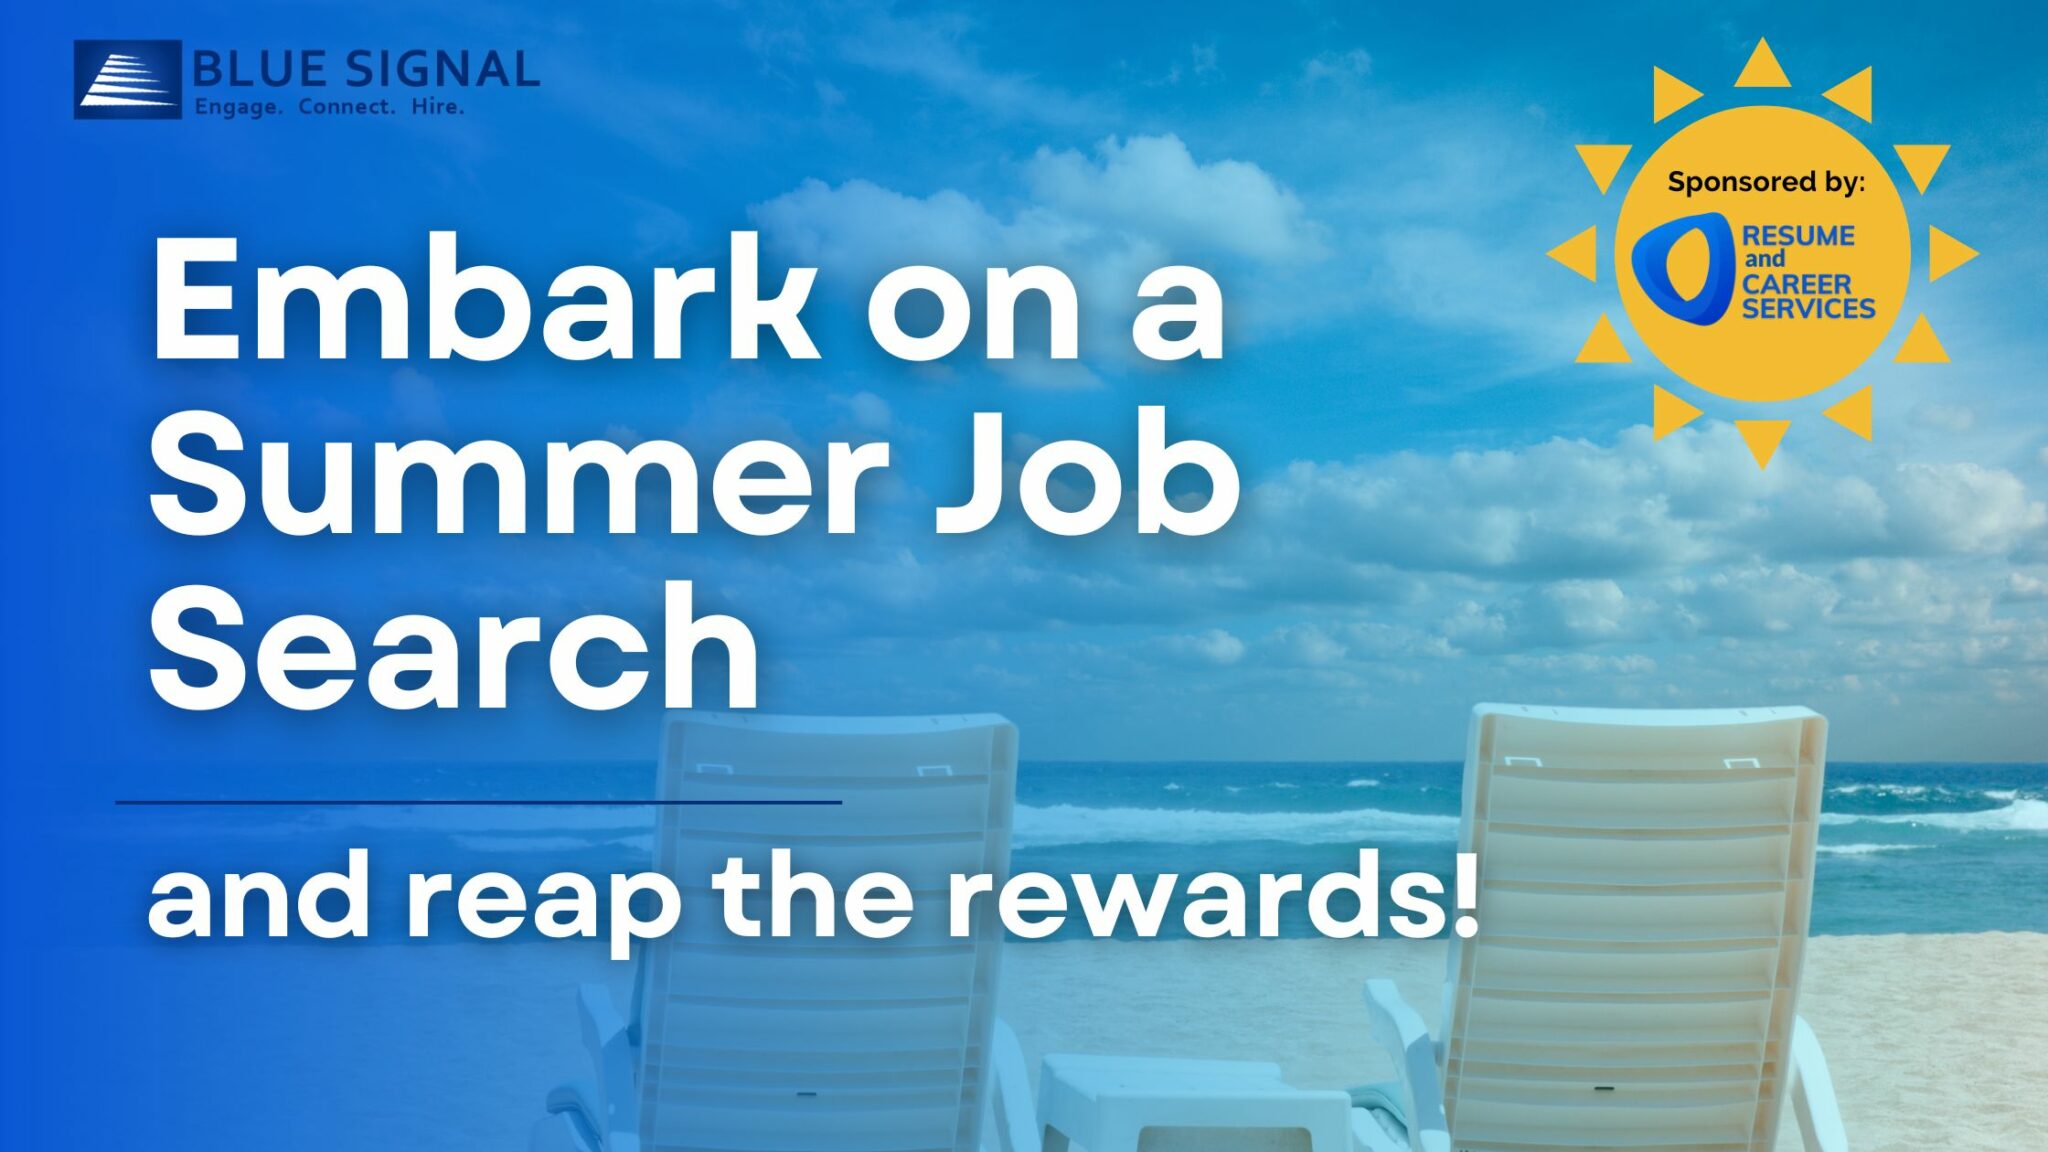 Embark on a Summer Job Search—and Reap the Rewards!